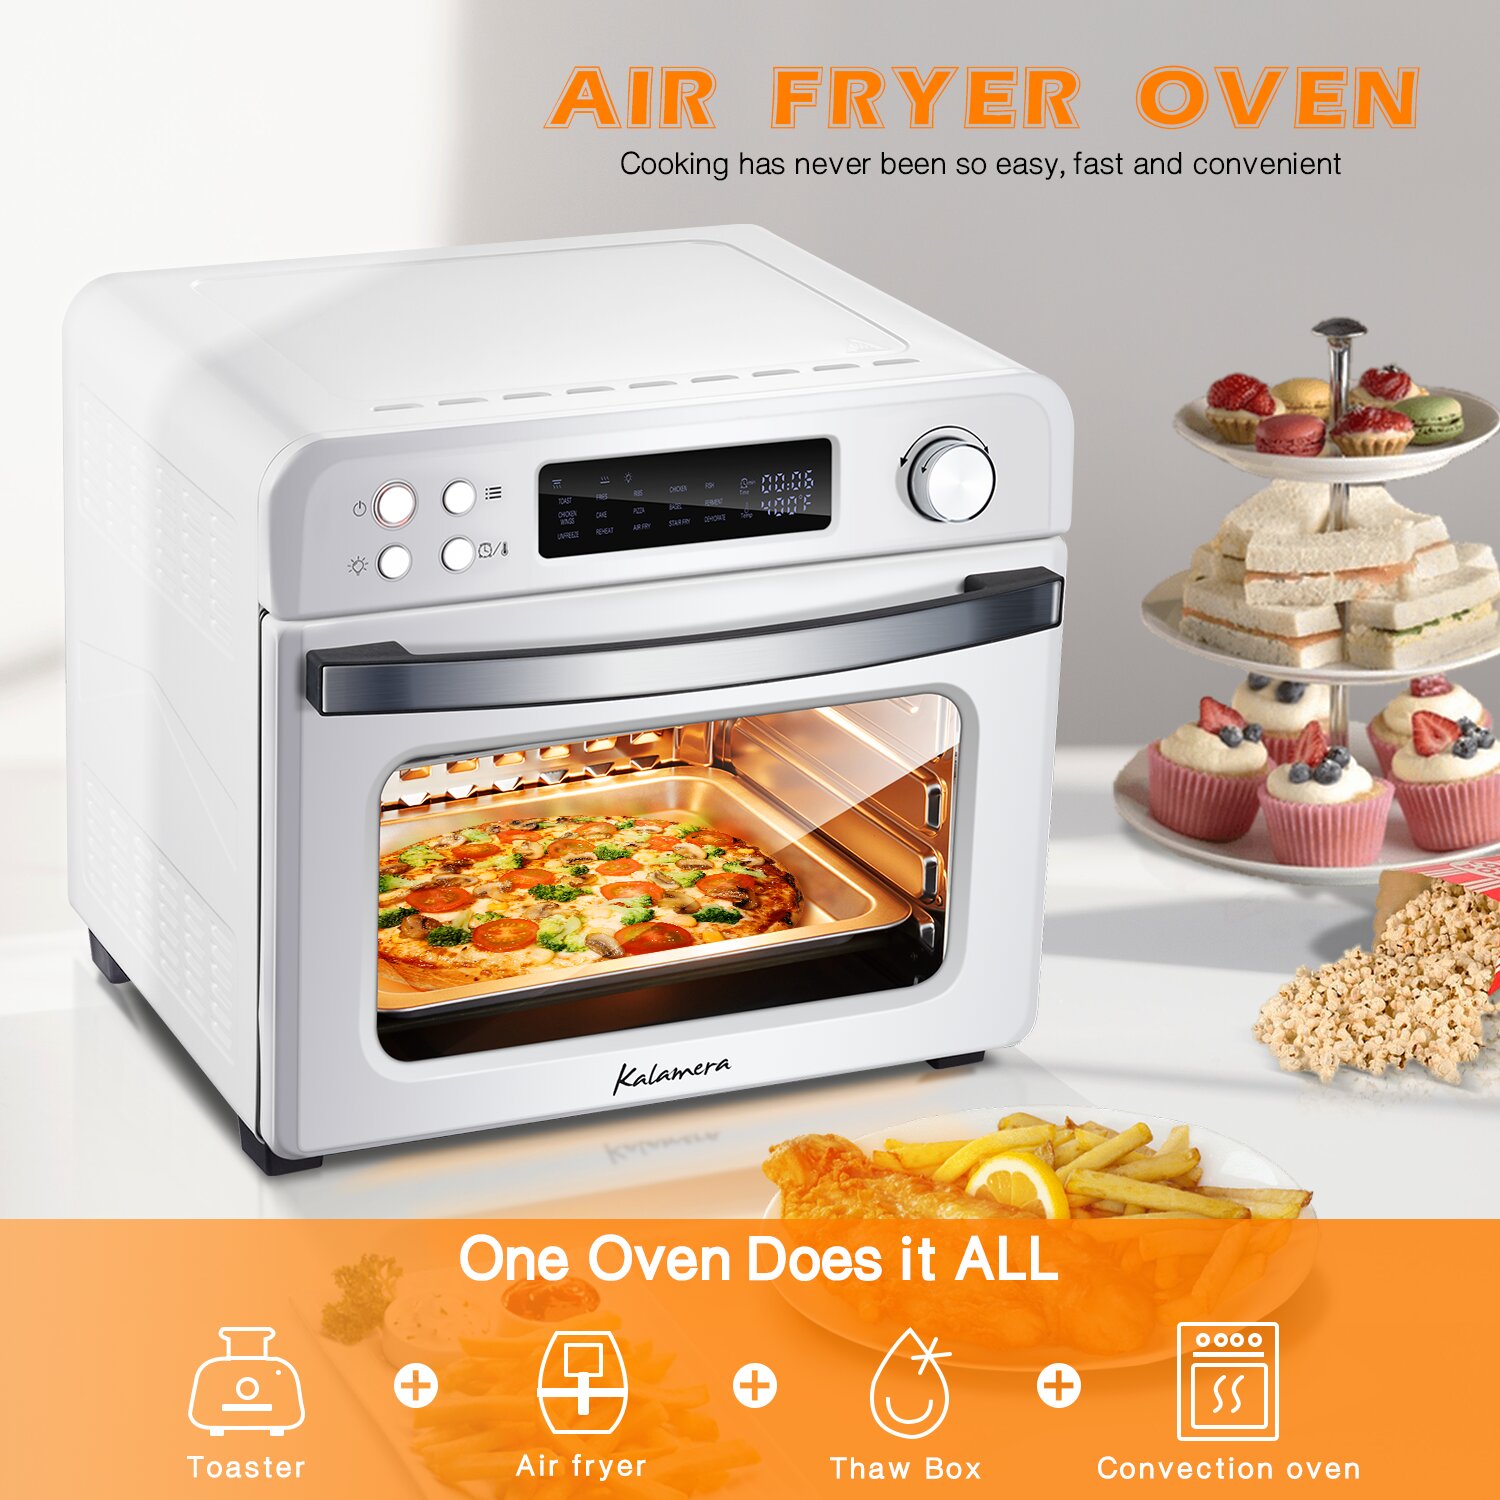  Retro Toaster Oven - SIMOE Air Fryer Oven & Toasters 19QT, 7 in  1 Convection Oven Combo for Family Use, 360° Even & Healthy Cooking, 5  Accessories & Recipe Book - Sliver: Home & Kitchen